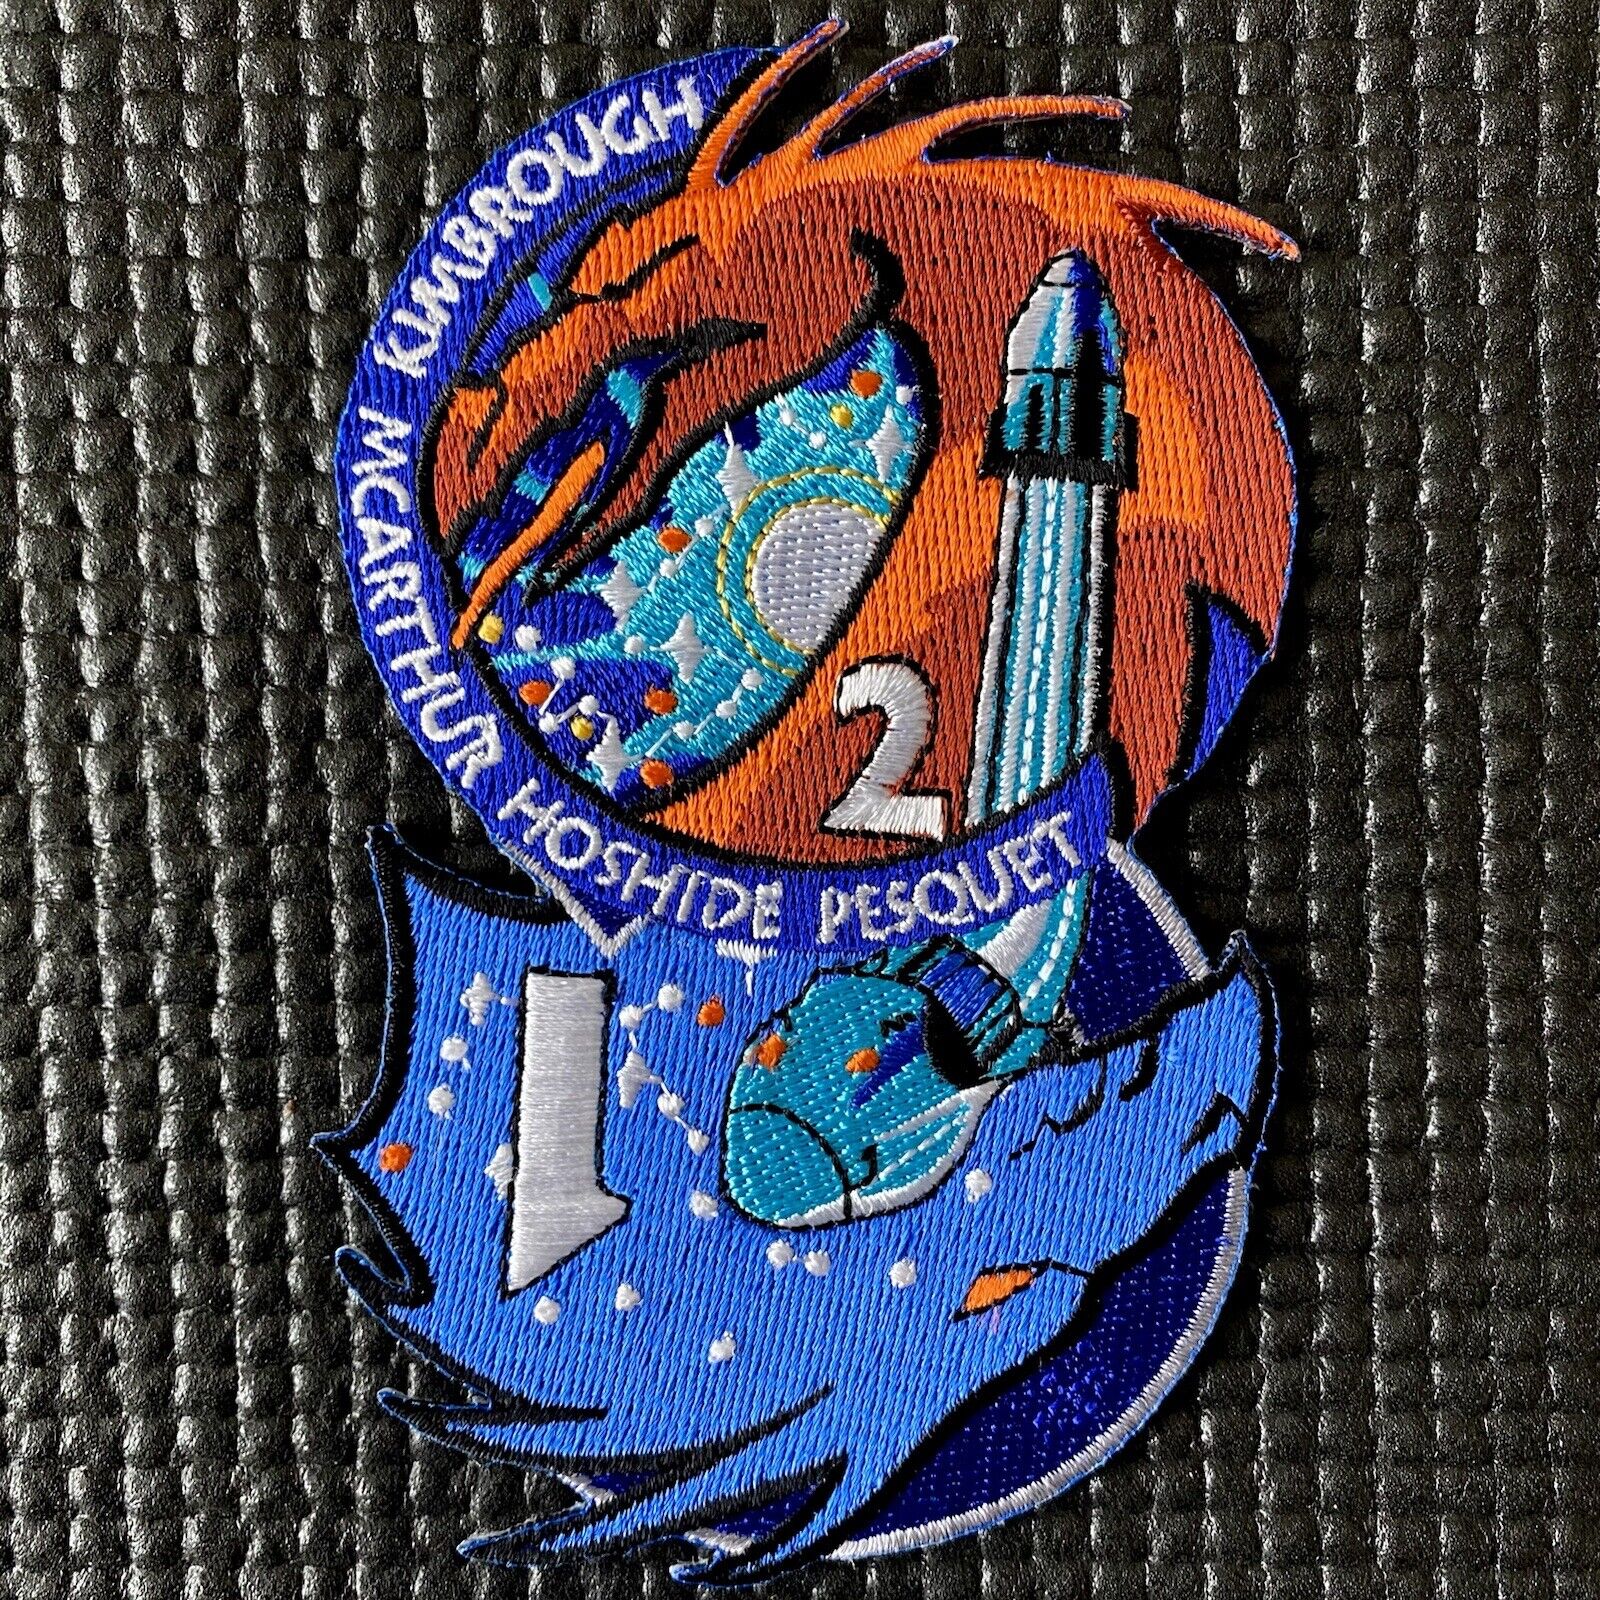 NASA SPACEX DEMO 2 CREW 1 AND 2-ASTRONAUT ISS ORIGINAL MISSION PATCH - 3.5” X 5”